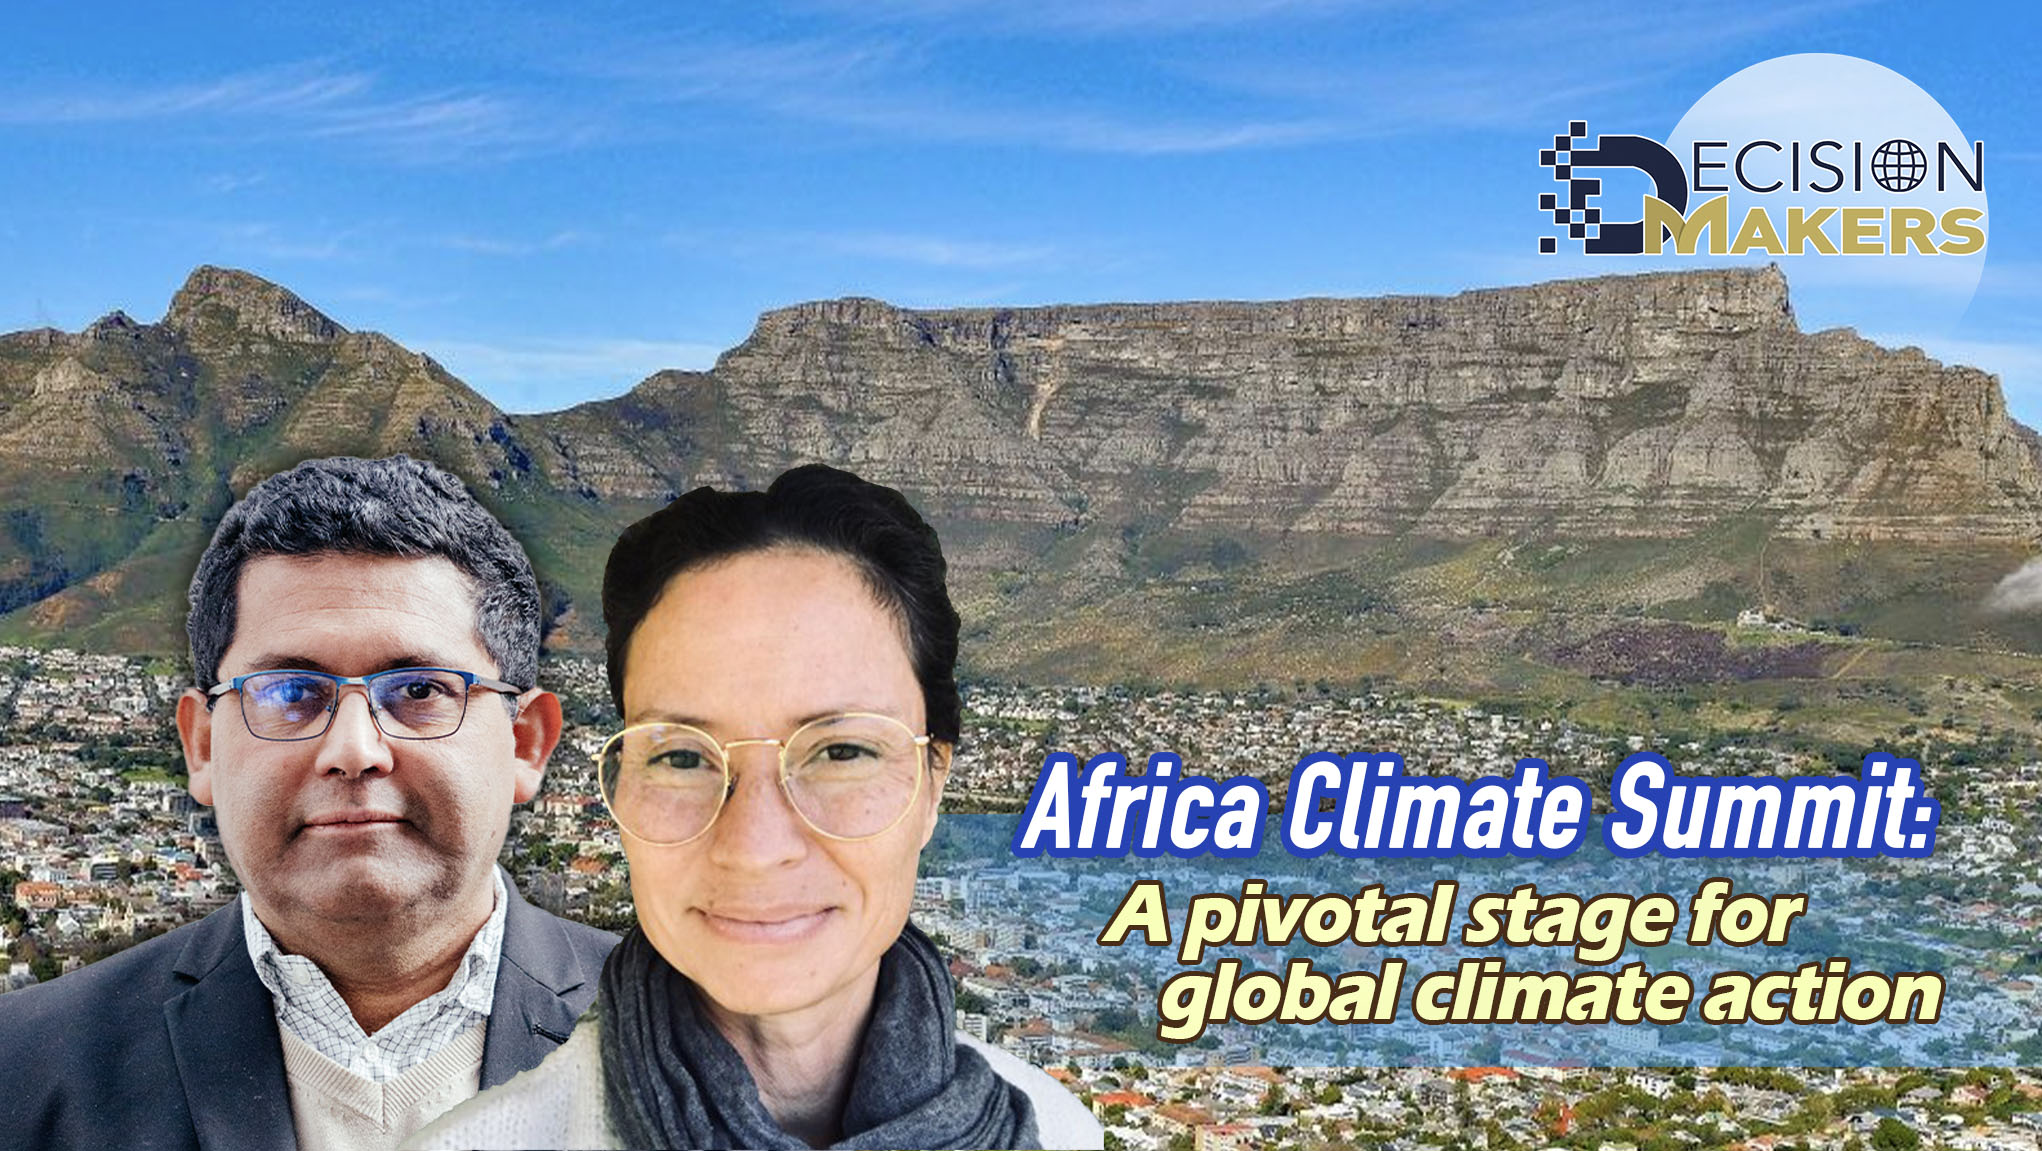 Africa Climate Summit: A pivotal stage for global climate action